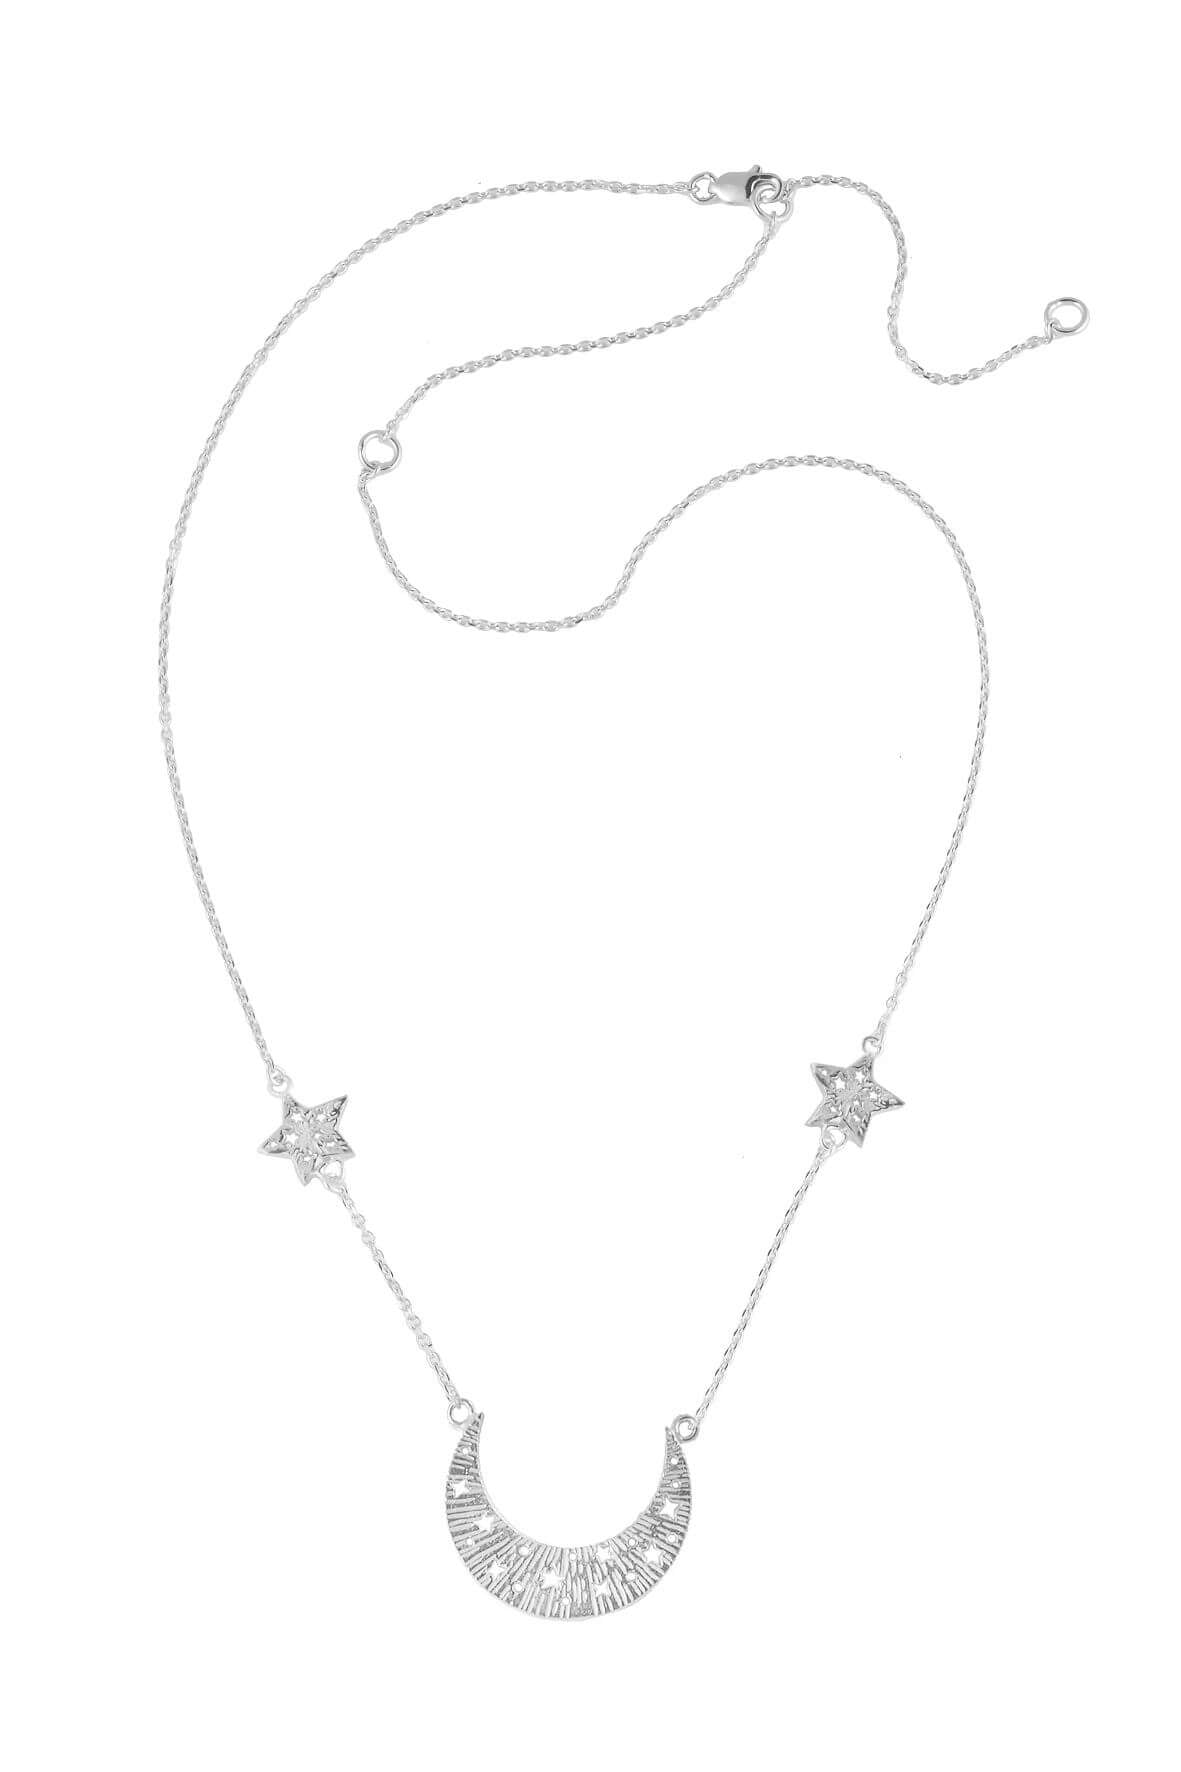 Moon swing with 2 stars on the chain necklace. Silver